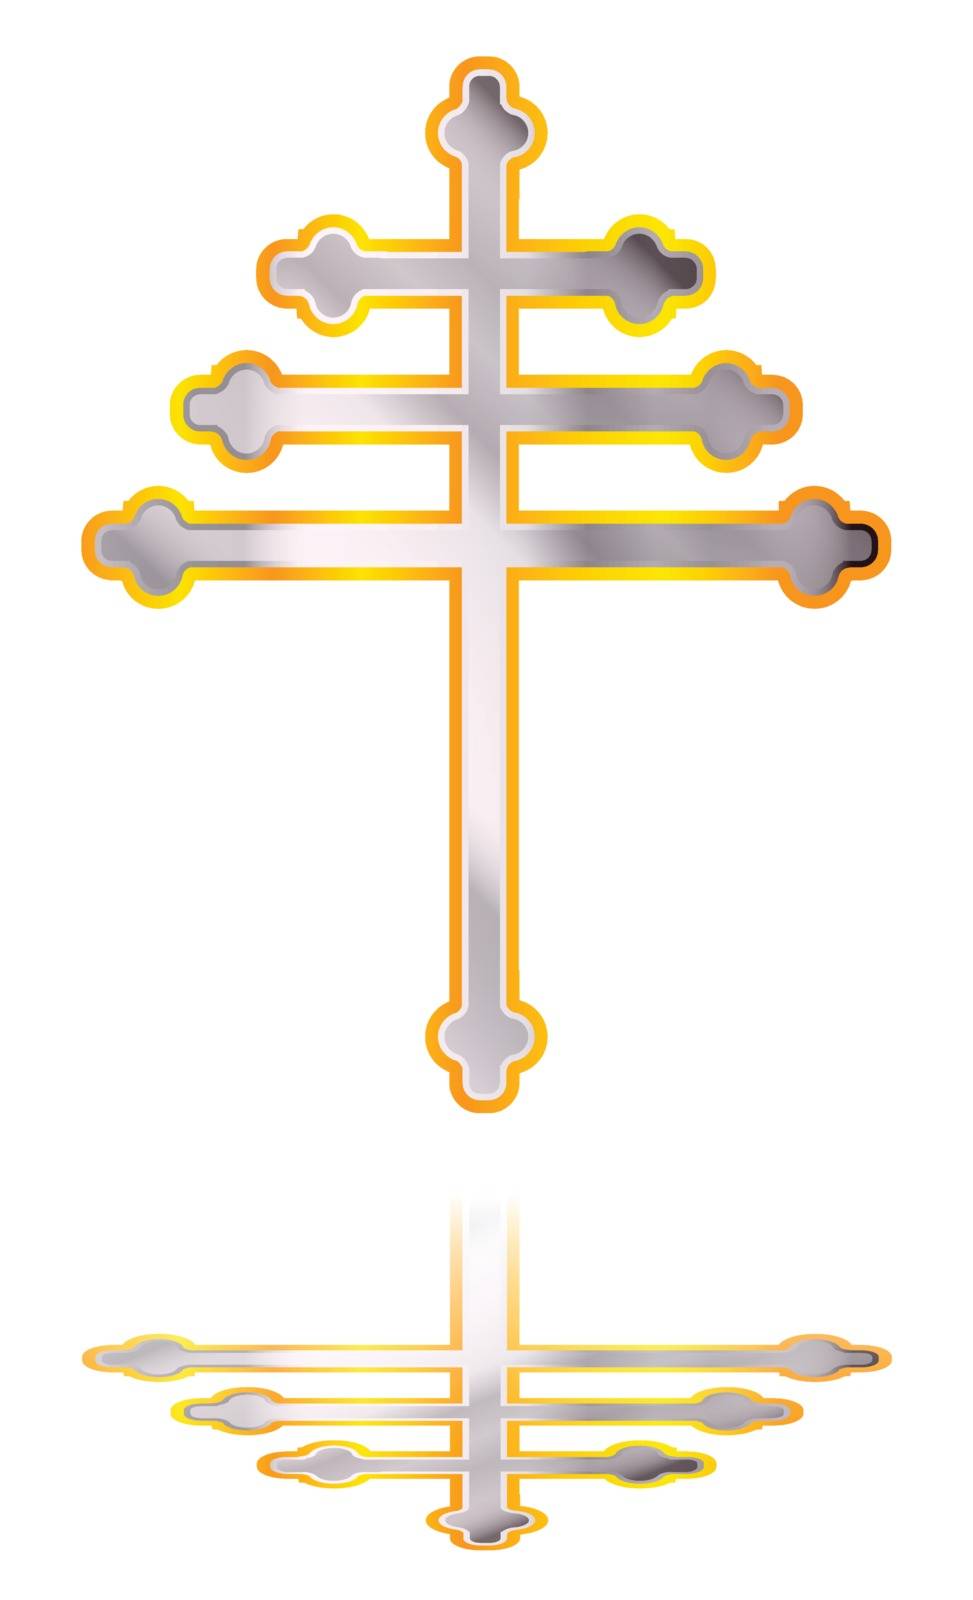 A Christian Maronite cross in silver and gold over a white background